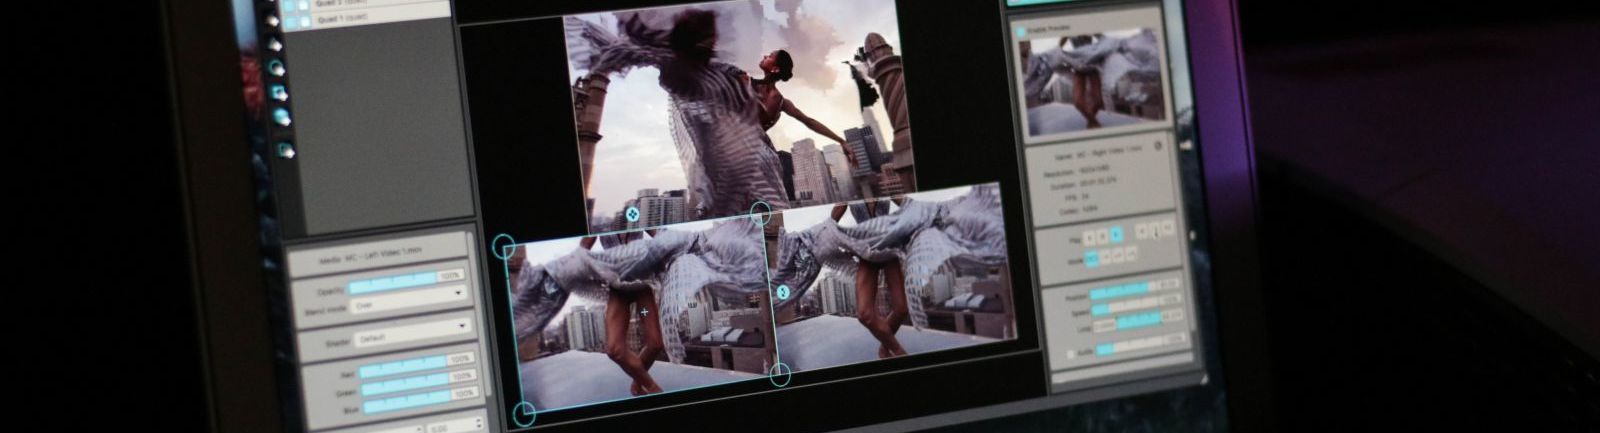 A computer monitor showing the film editing of a woman dancing.